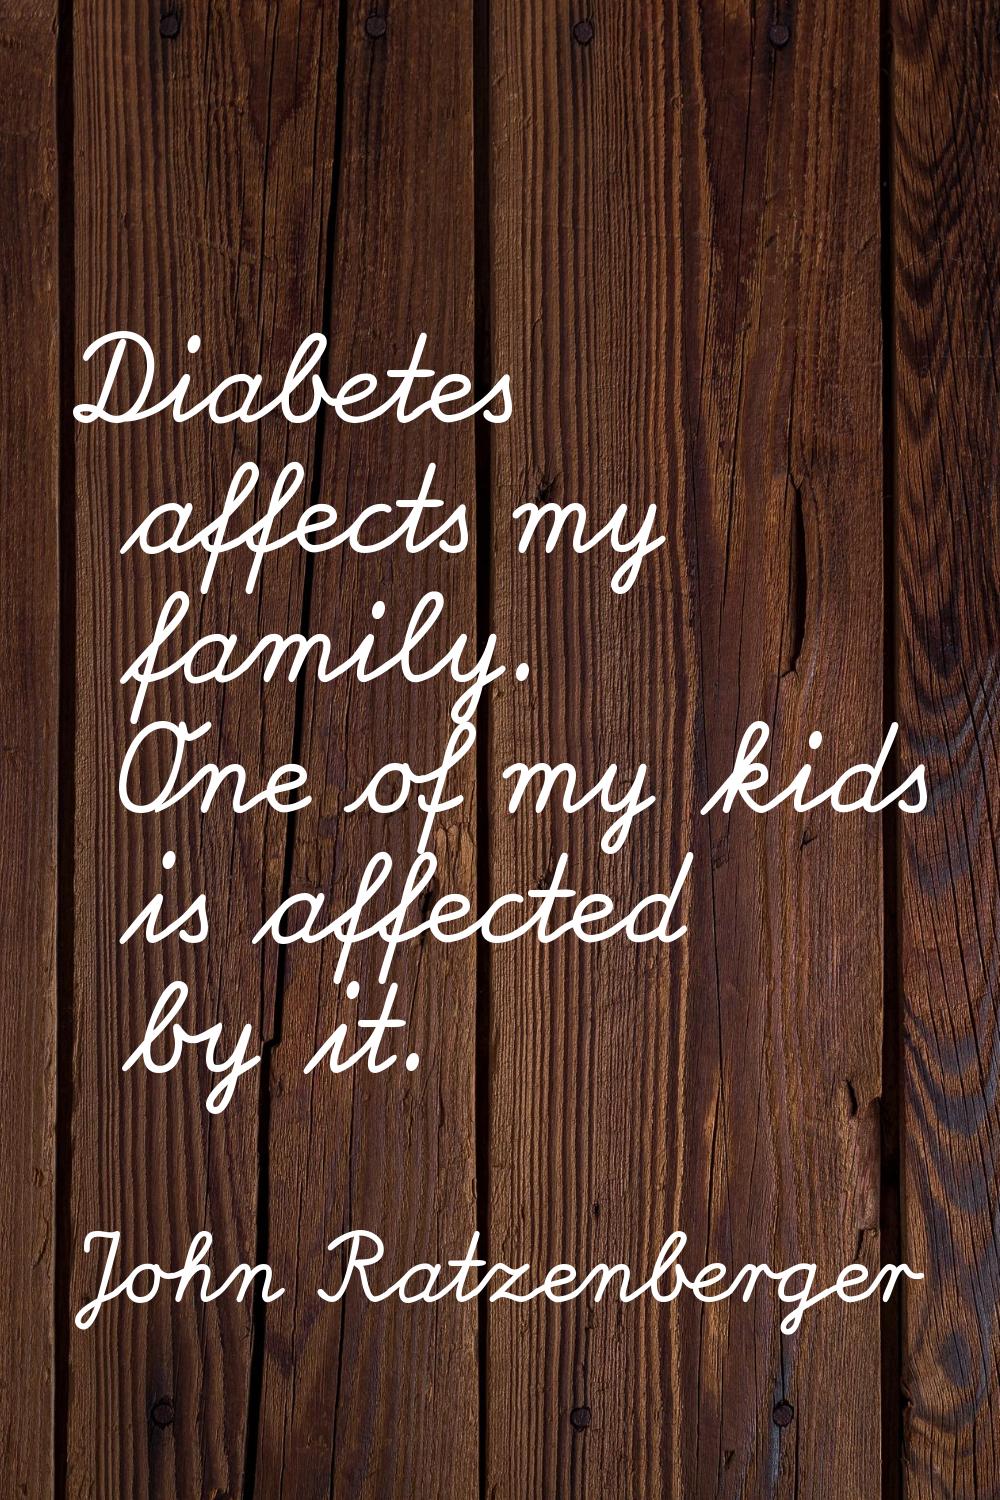 Diabetes affects my family. One of my kids is affected by it.